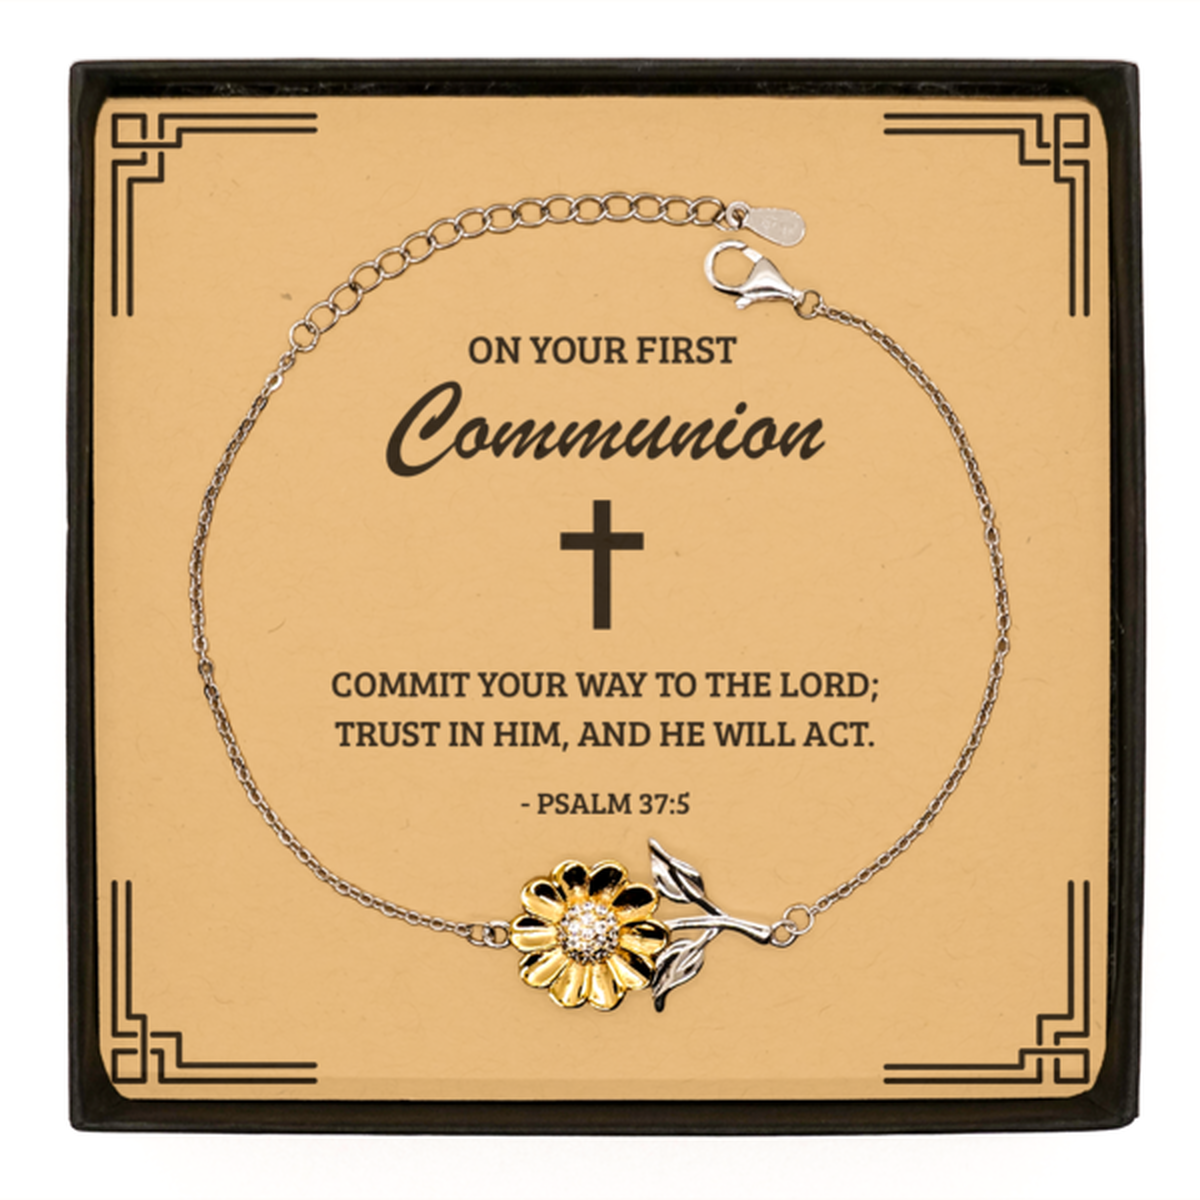 First Communion Gifts for Teenage Girls, Commit your way to the Lord, .925 Sterling Silver Sunflower Bracelet with Bible Verse Message Card, Religious Catholic Bracelet for Daughter, Granddaughter